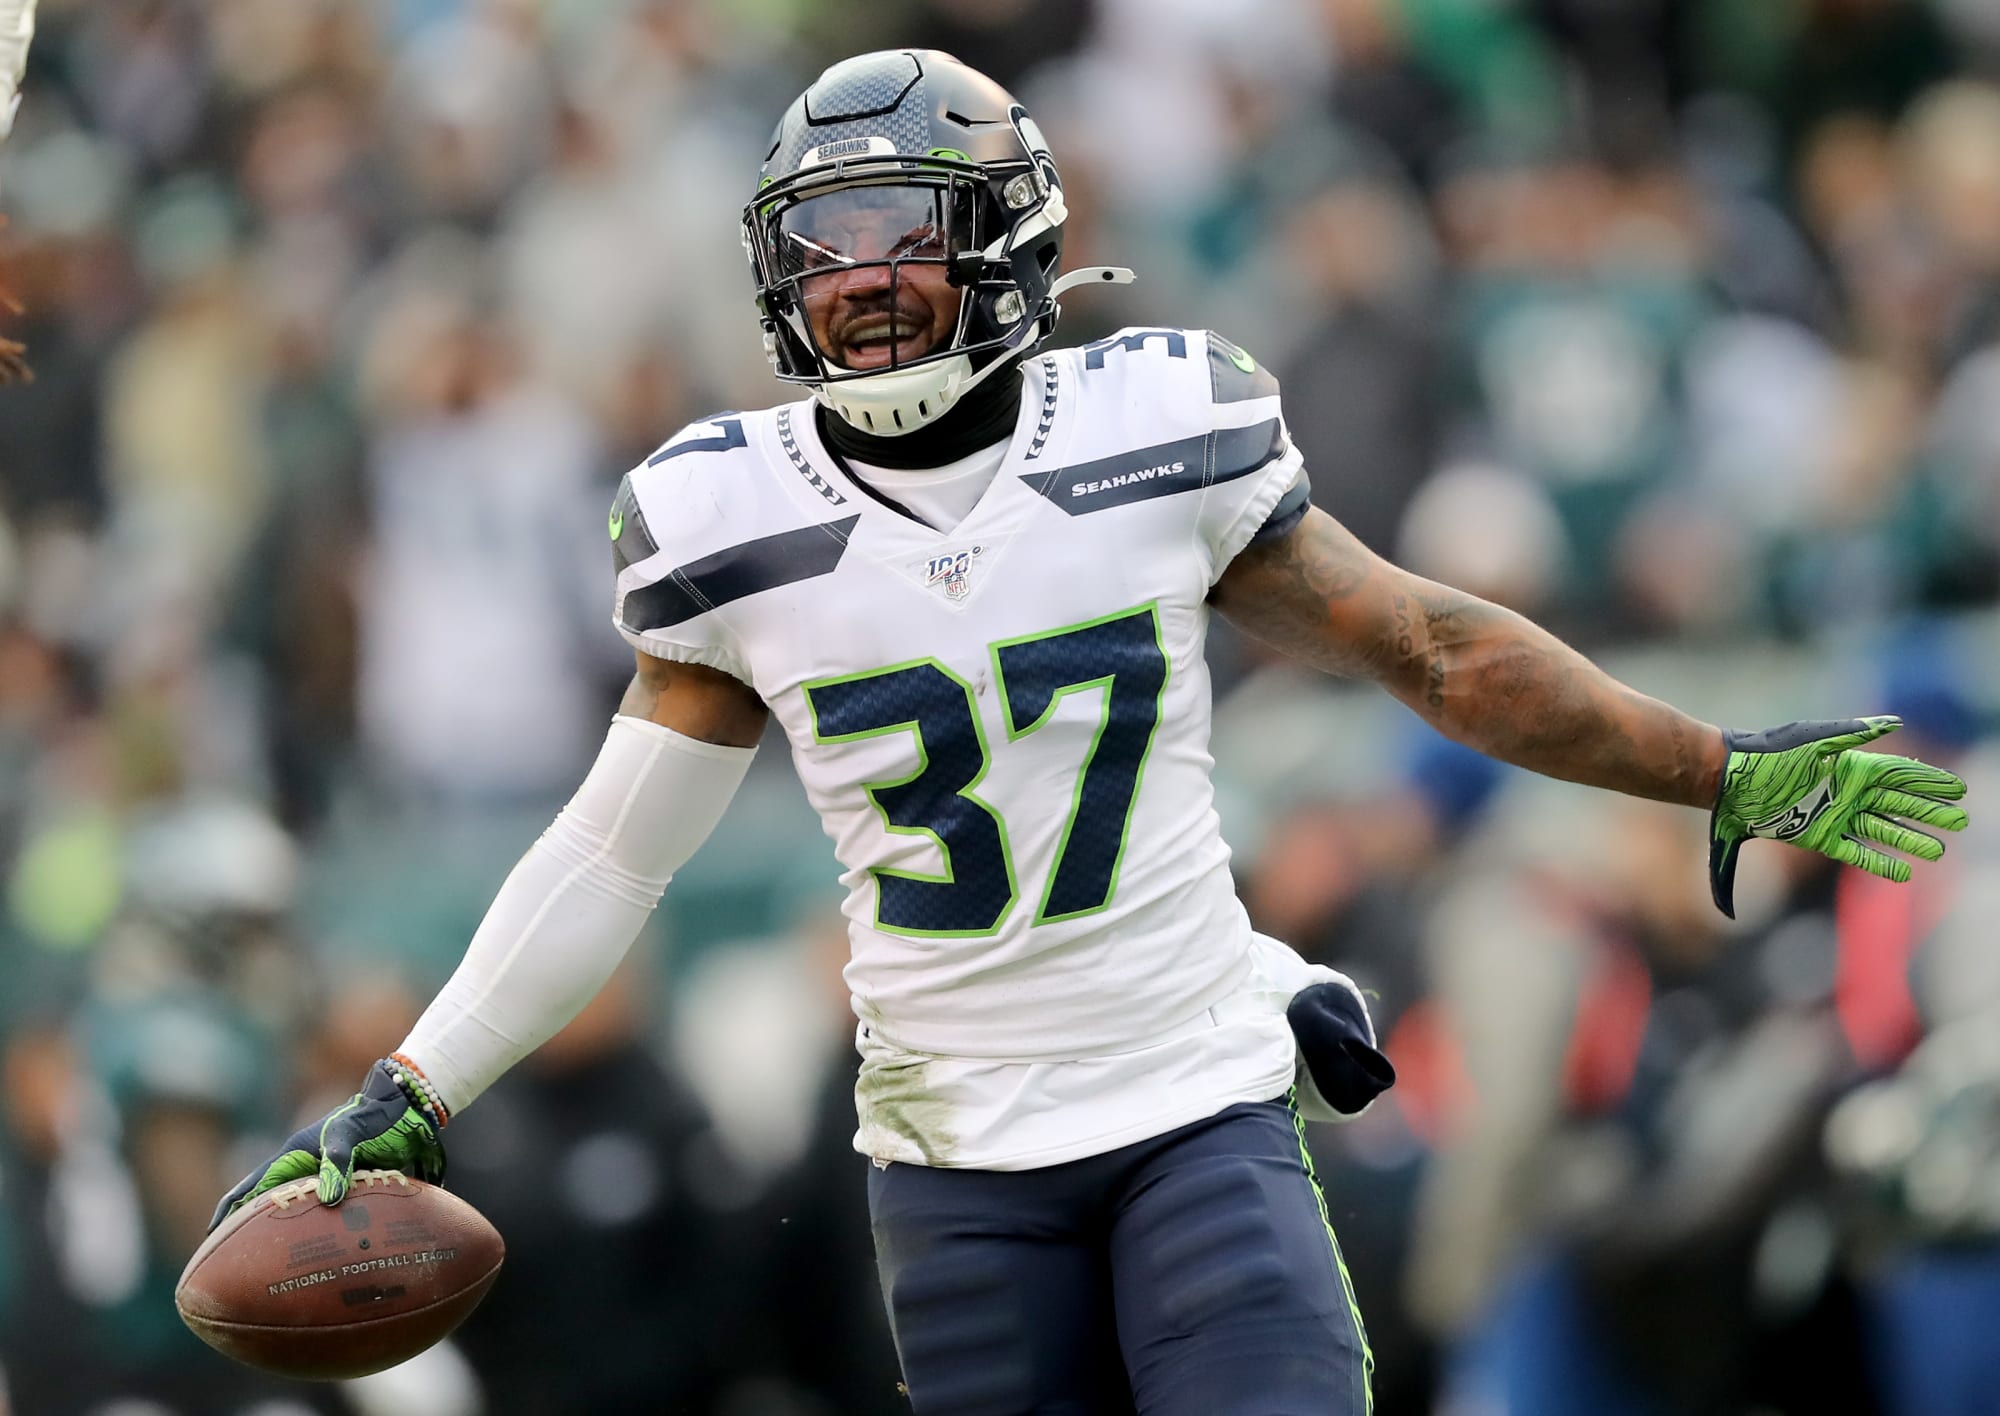 Seahawks Players that could be traded for additional draft picks